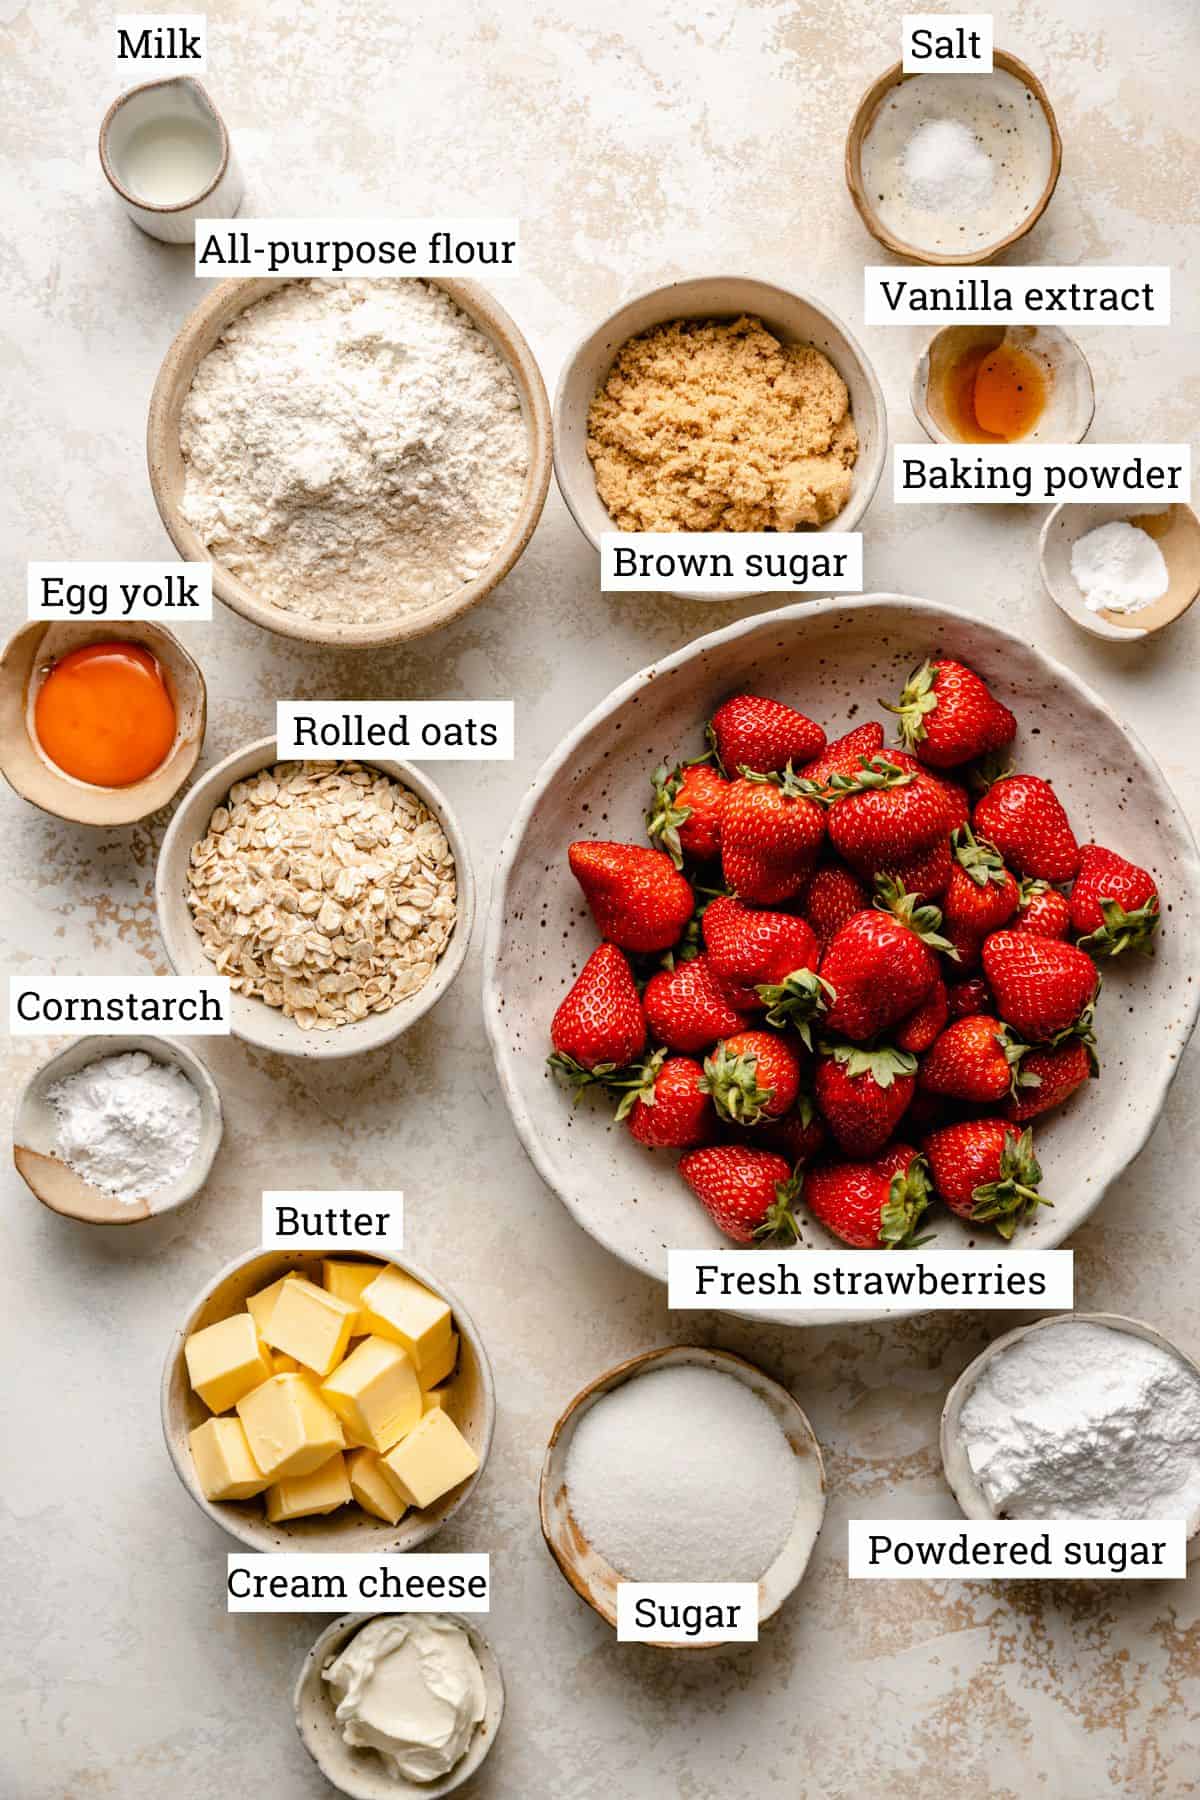 An array of bowls with ingredients including strawberries, flour, oats and sugars.